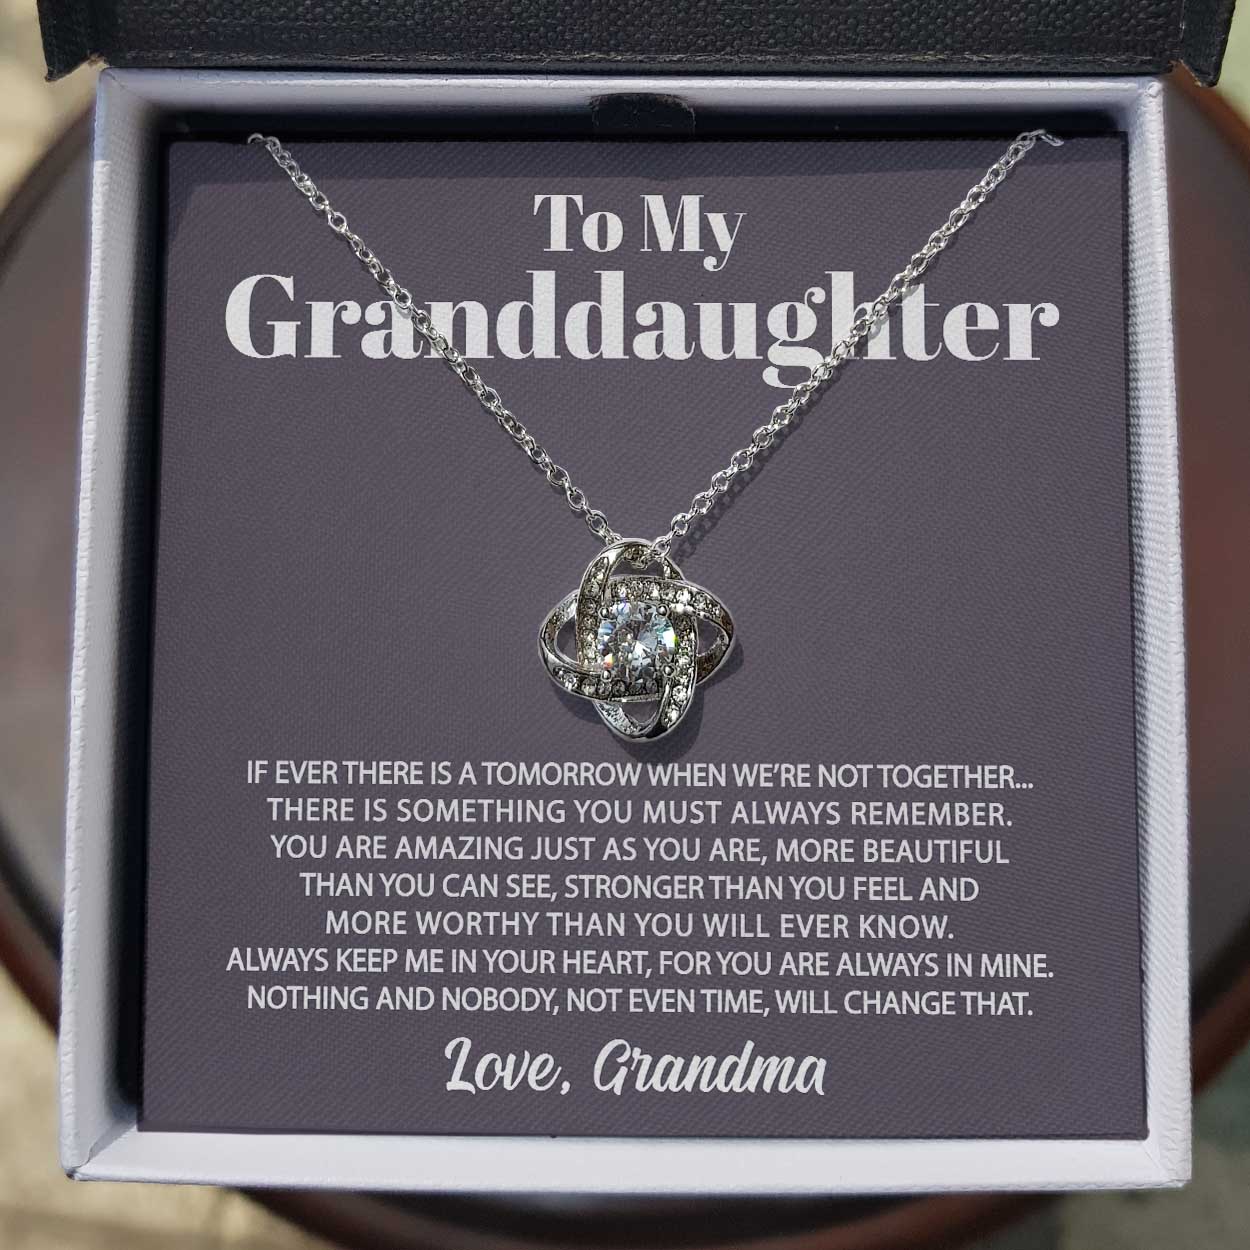 ShineOn Fulfillment Jewelry Standard Box To My Granddaughter - Always Remember - Love Knot Necklace